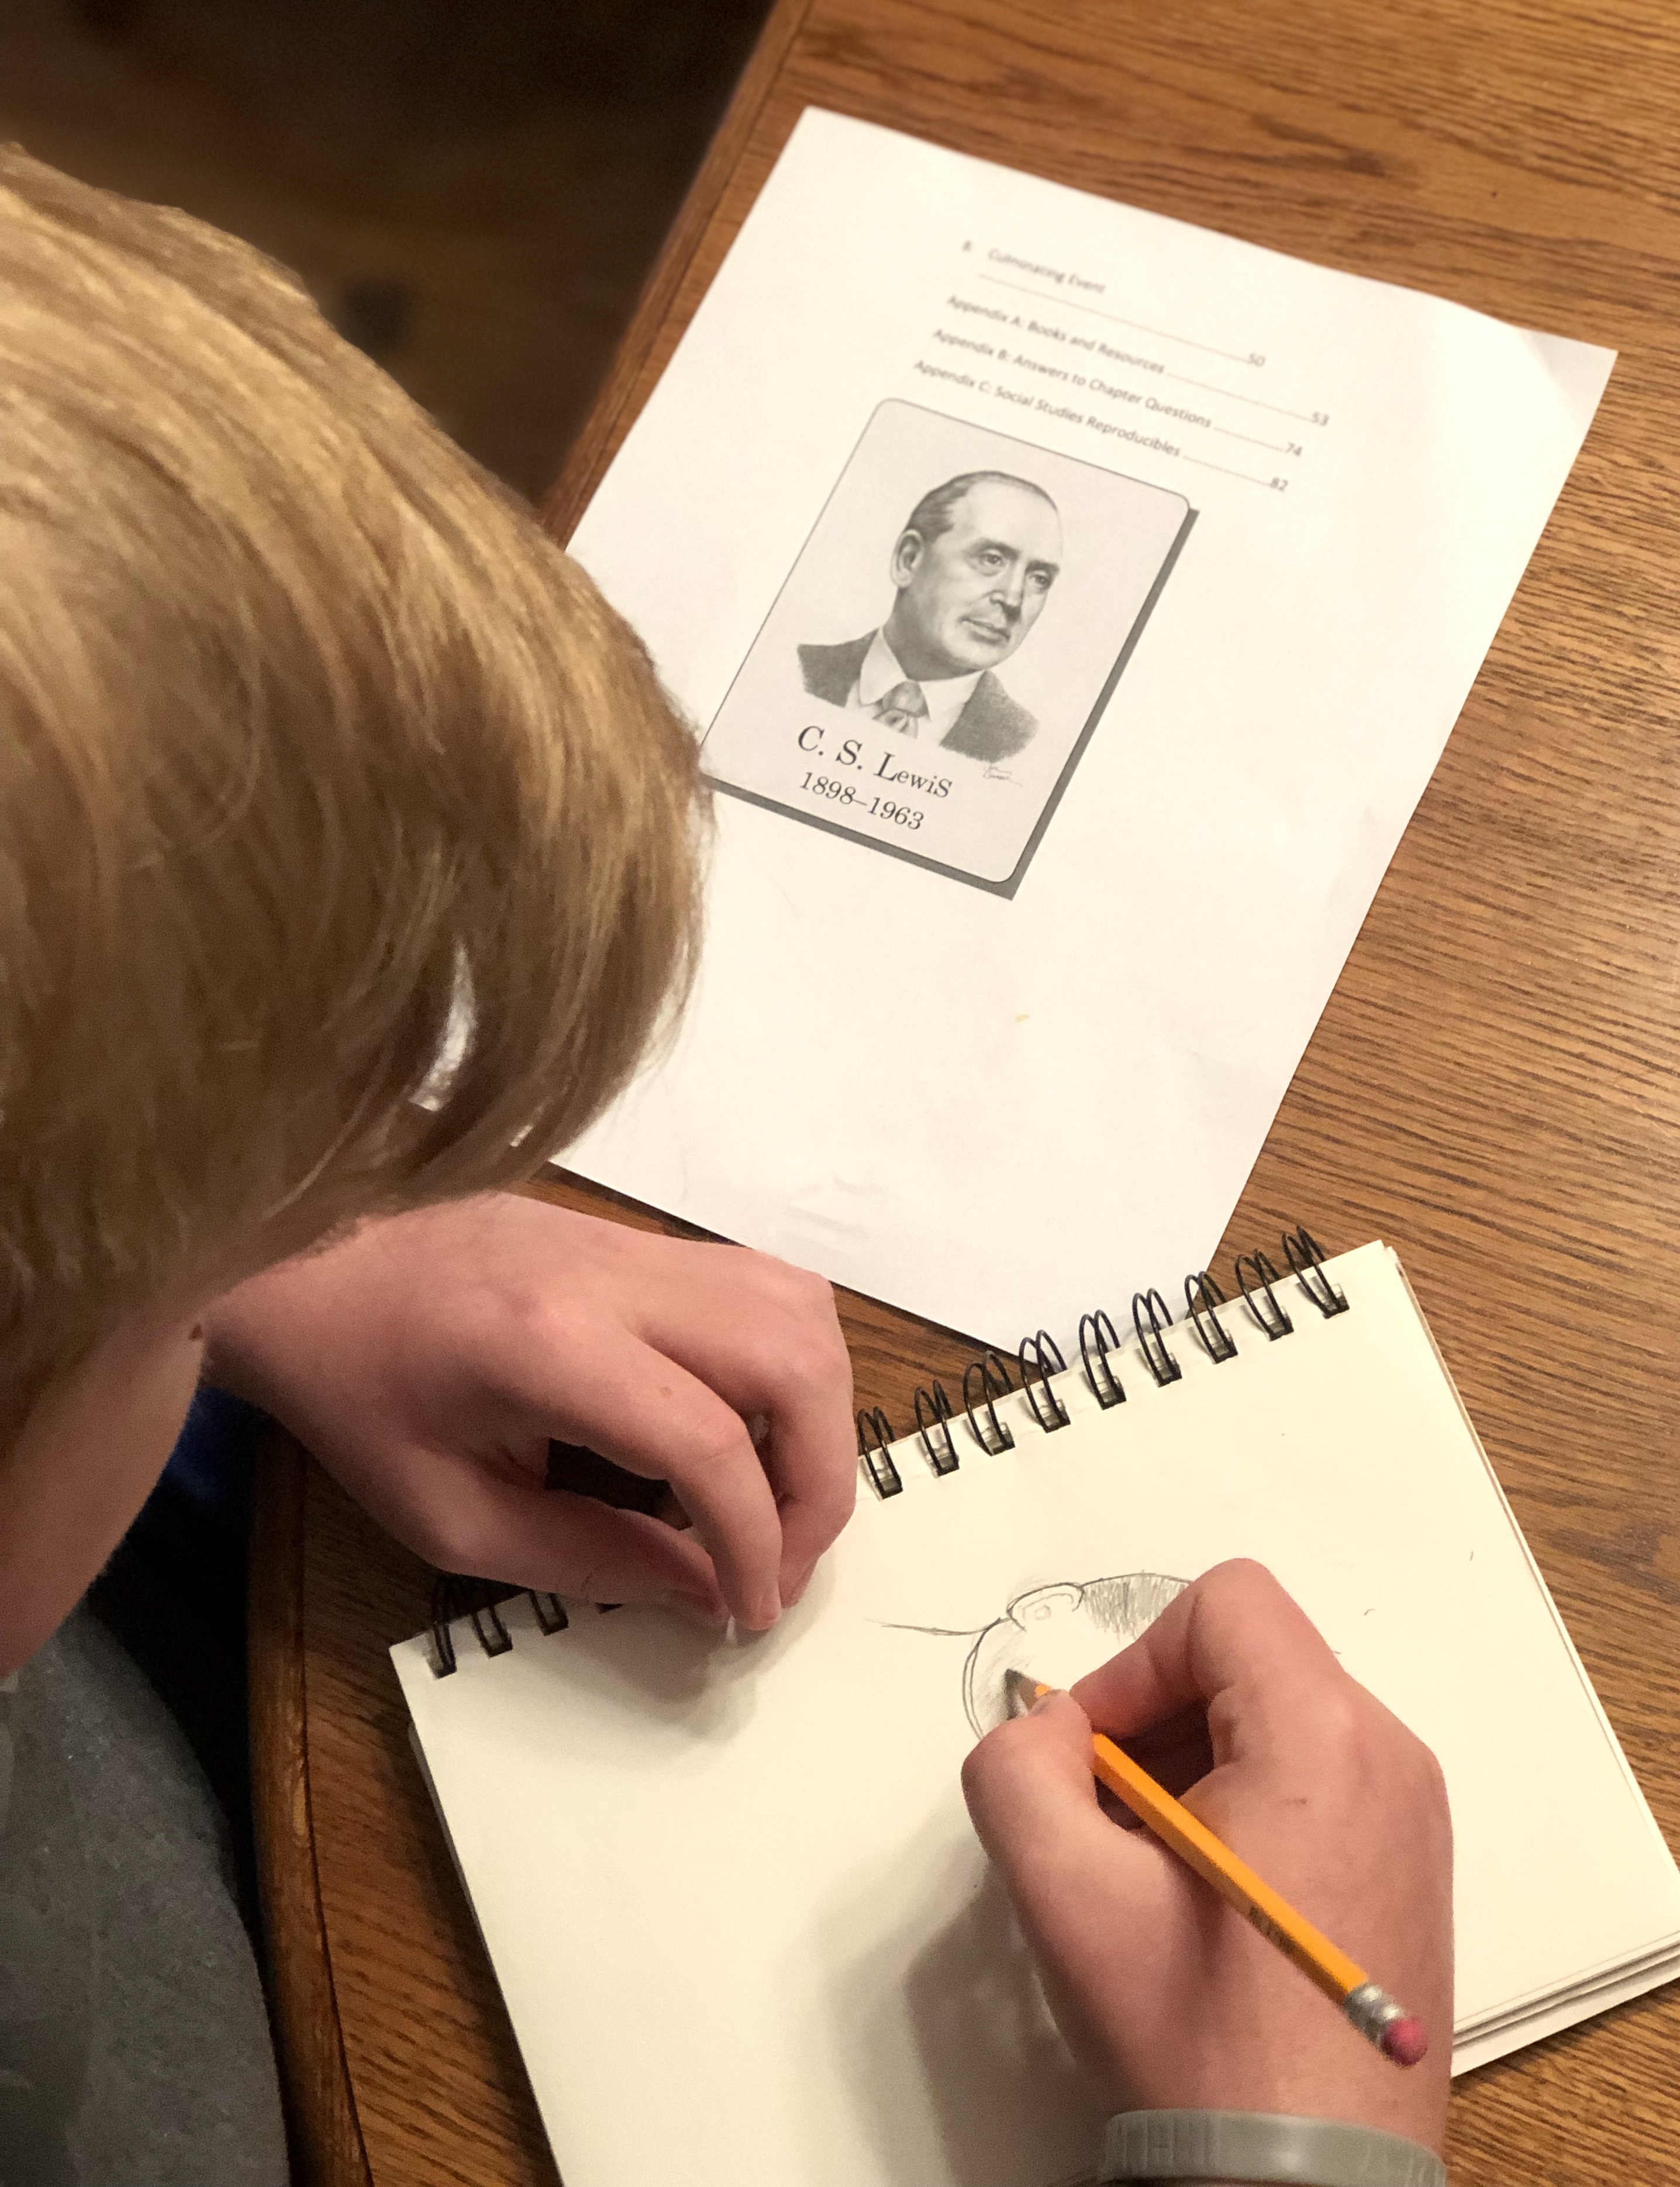 My son sketching a portrait of C.S. Lewis.